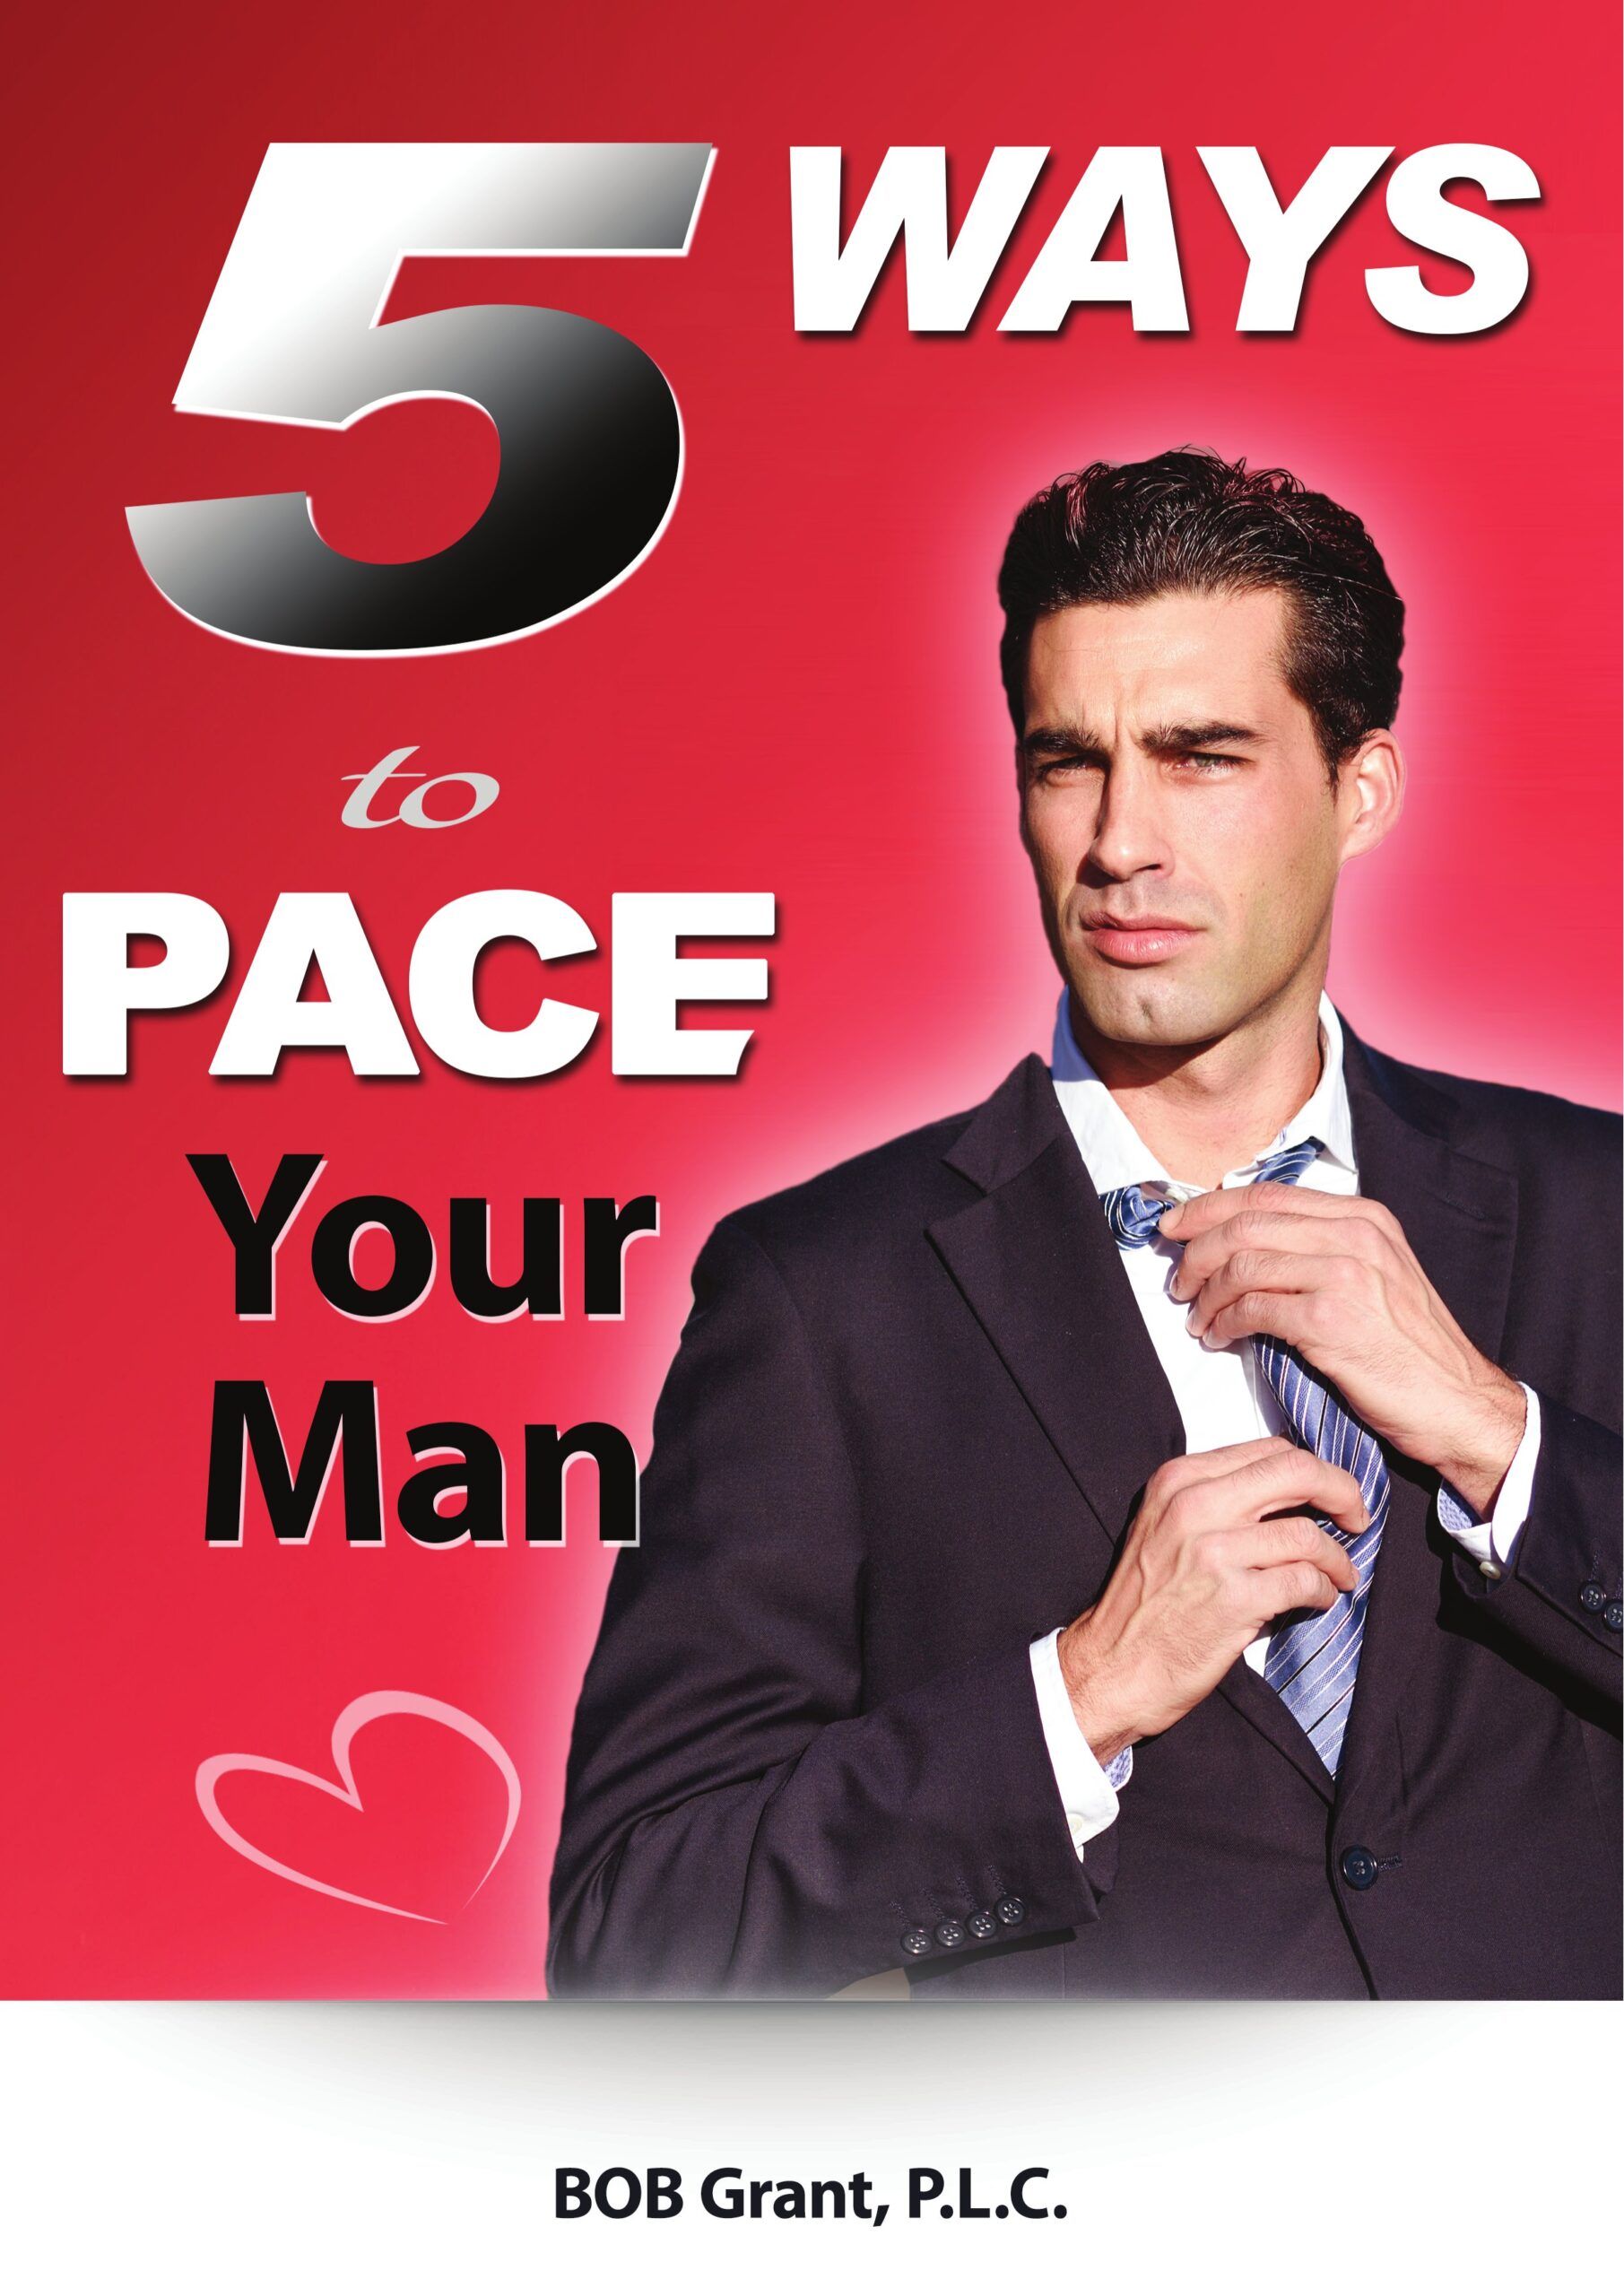 5 ways to pace your man